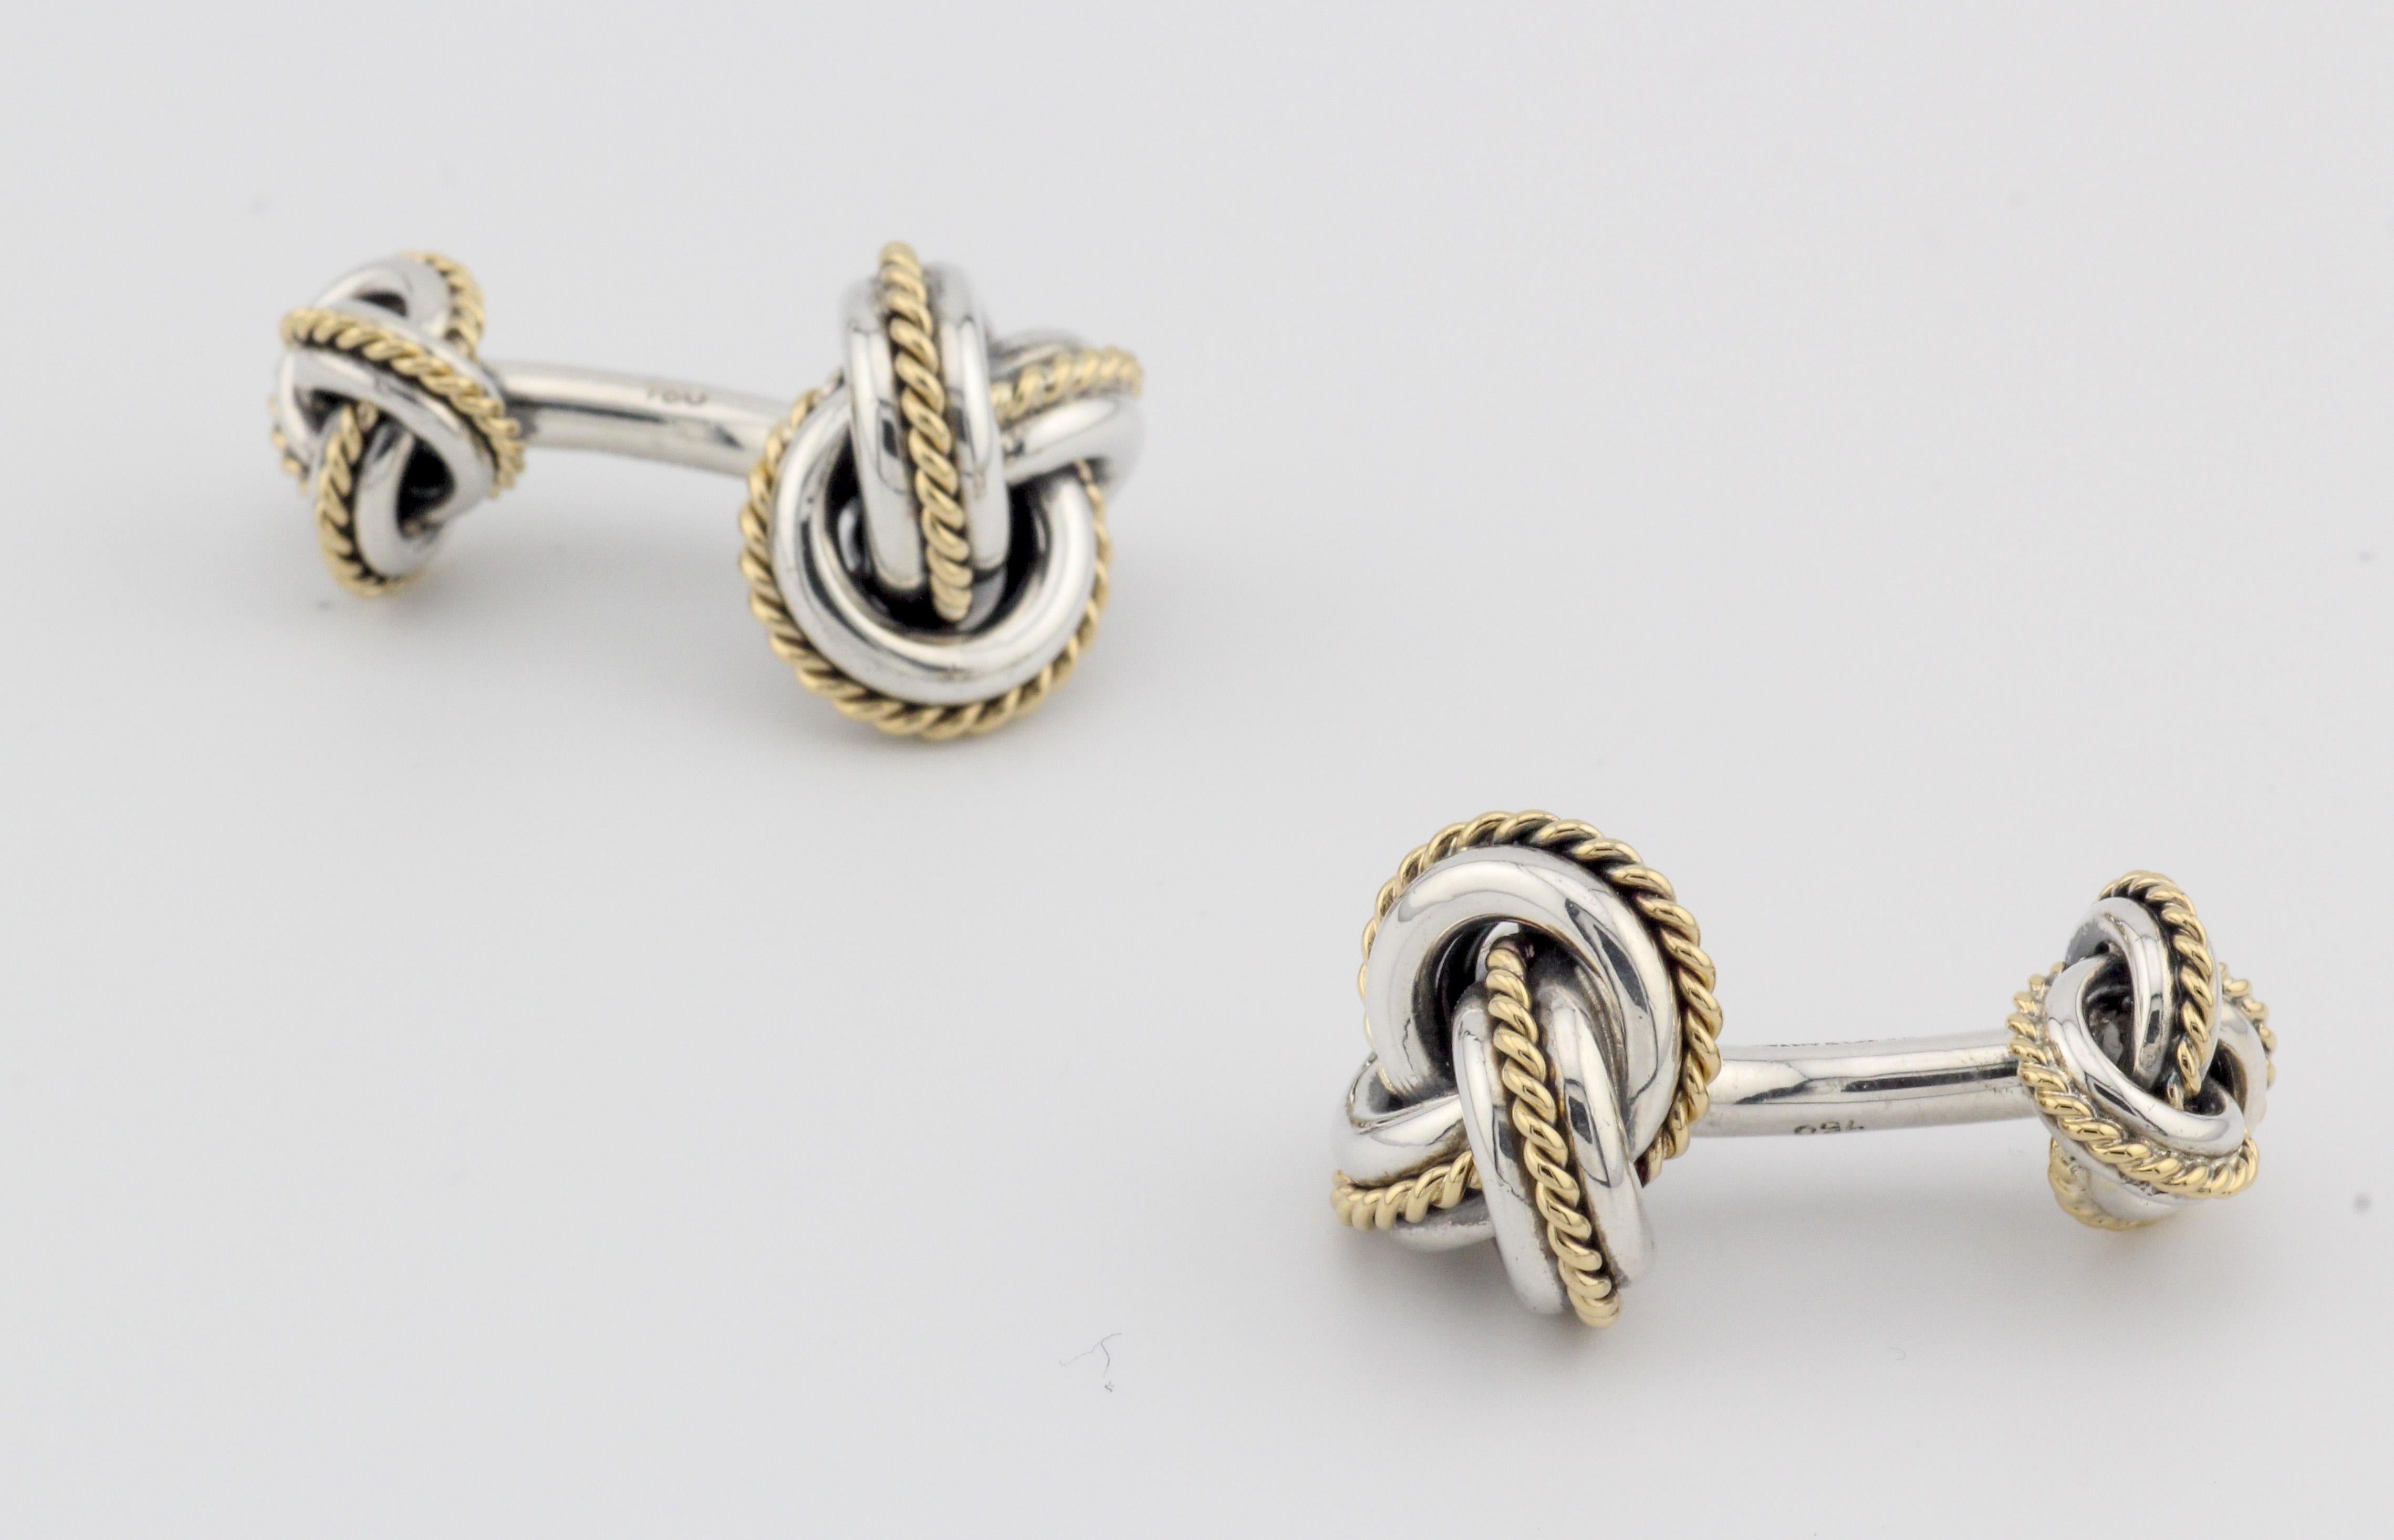 Tiffany & Co 18k Gold Sterling Silver Rope Knot Cufflinks In Good Condition For Sale In Bellmore, NY